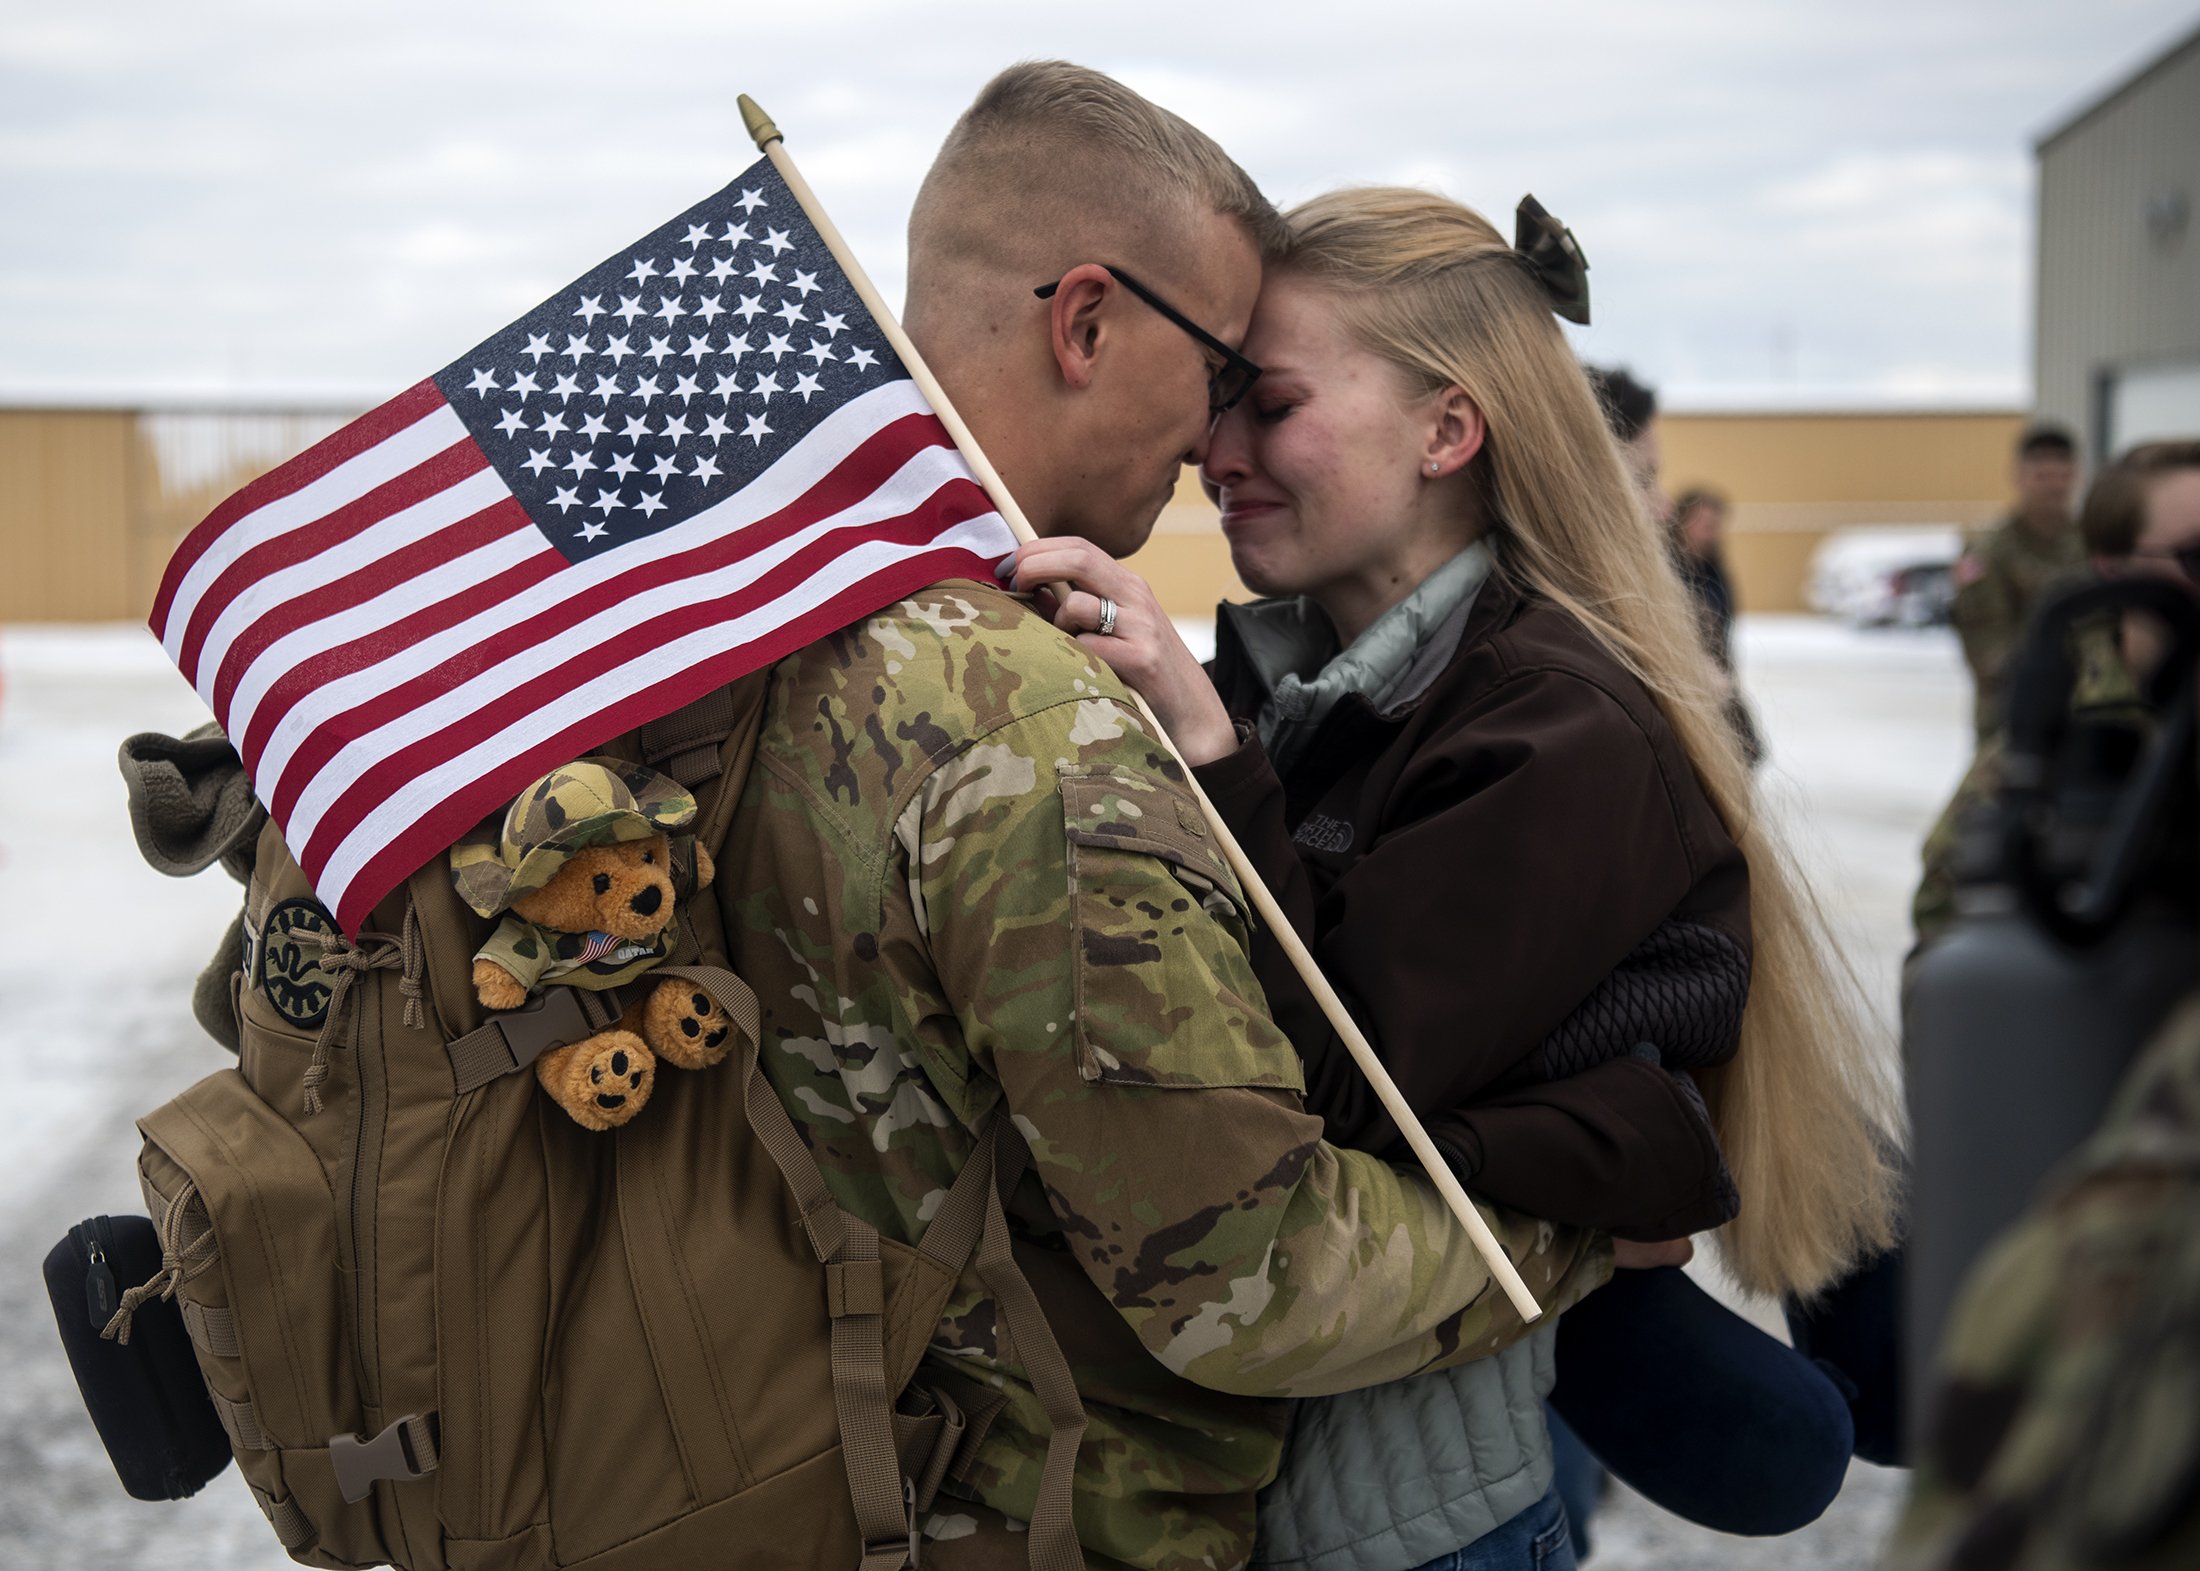  Jane Schweitzer, right, embraces her husband Specialist Kaedin Schweitzer as Montana Army National Guard's 163rd Combined Arms Battalion returns to Montana at Minuteman Aviation in Missoula, Mont., Thursday, Nov. 10, 2022. The battalion spent over a